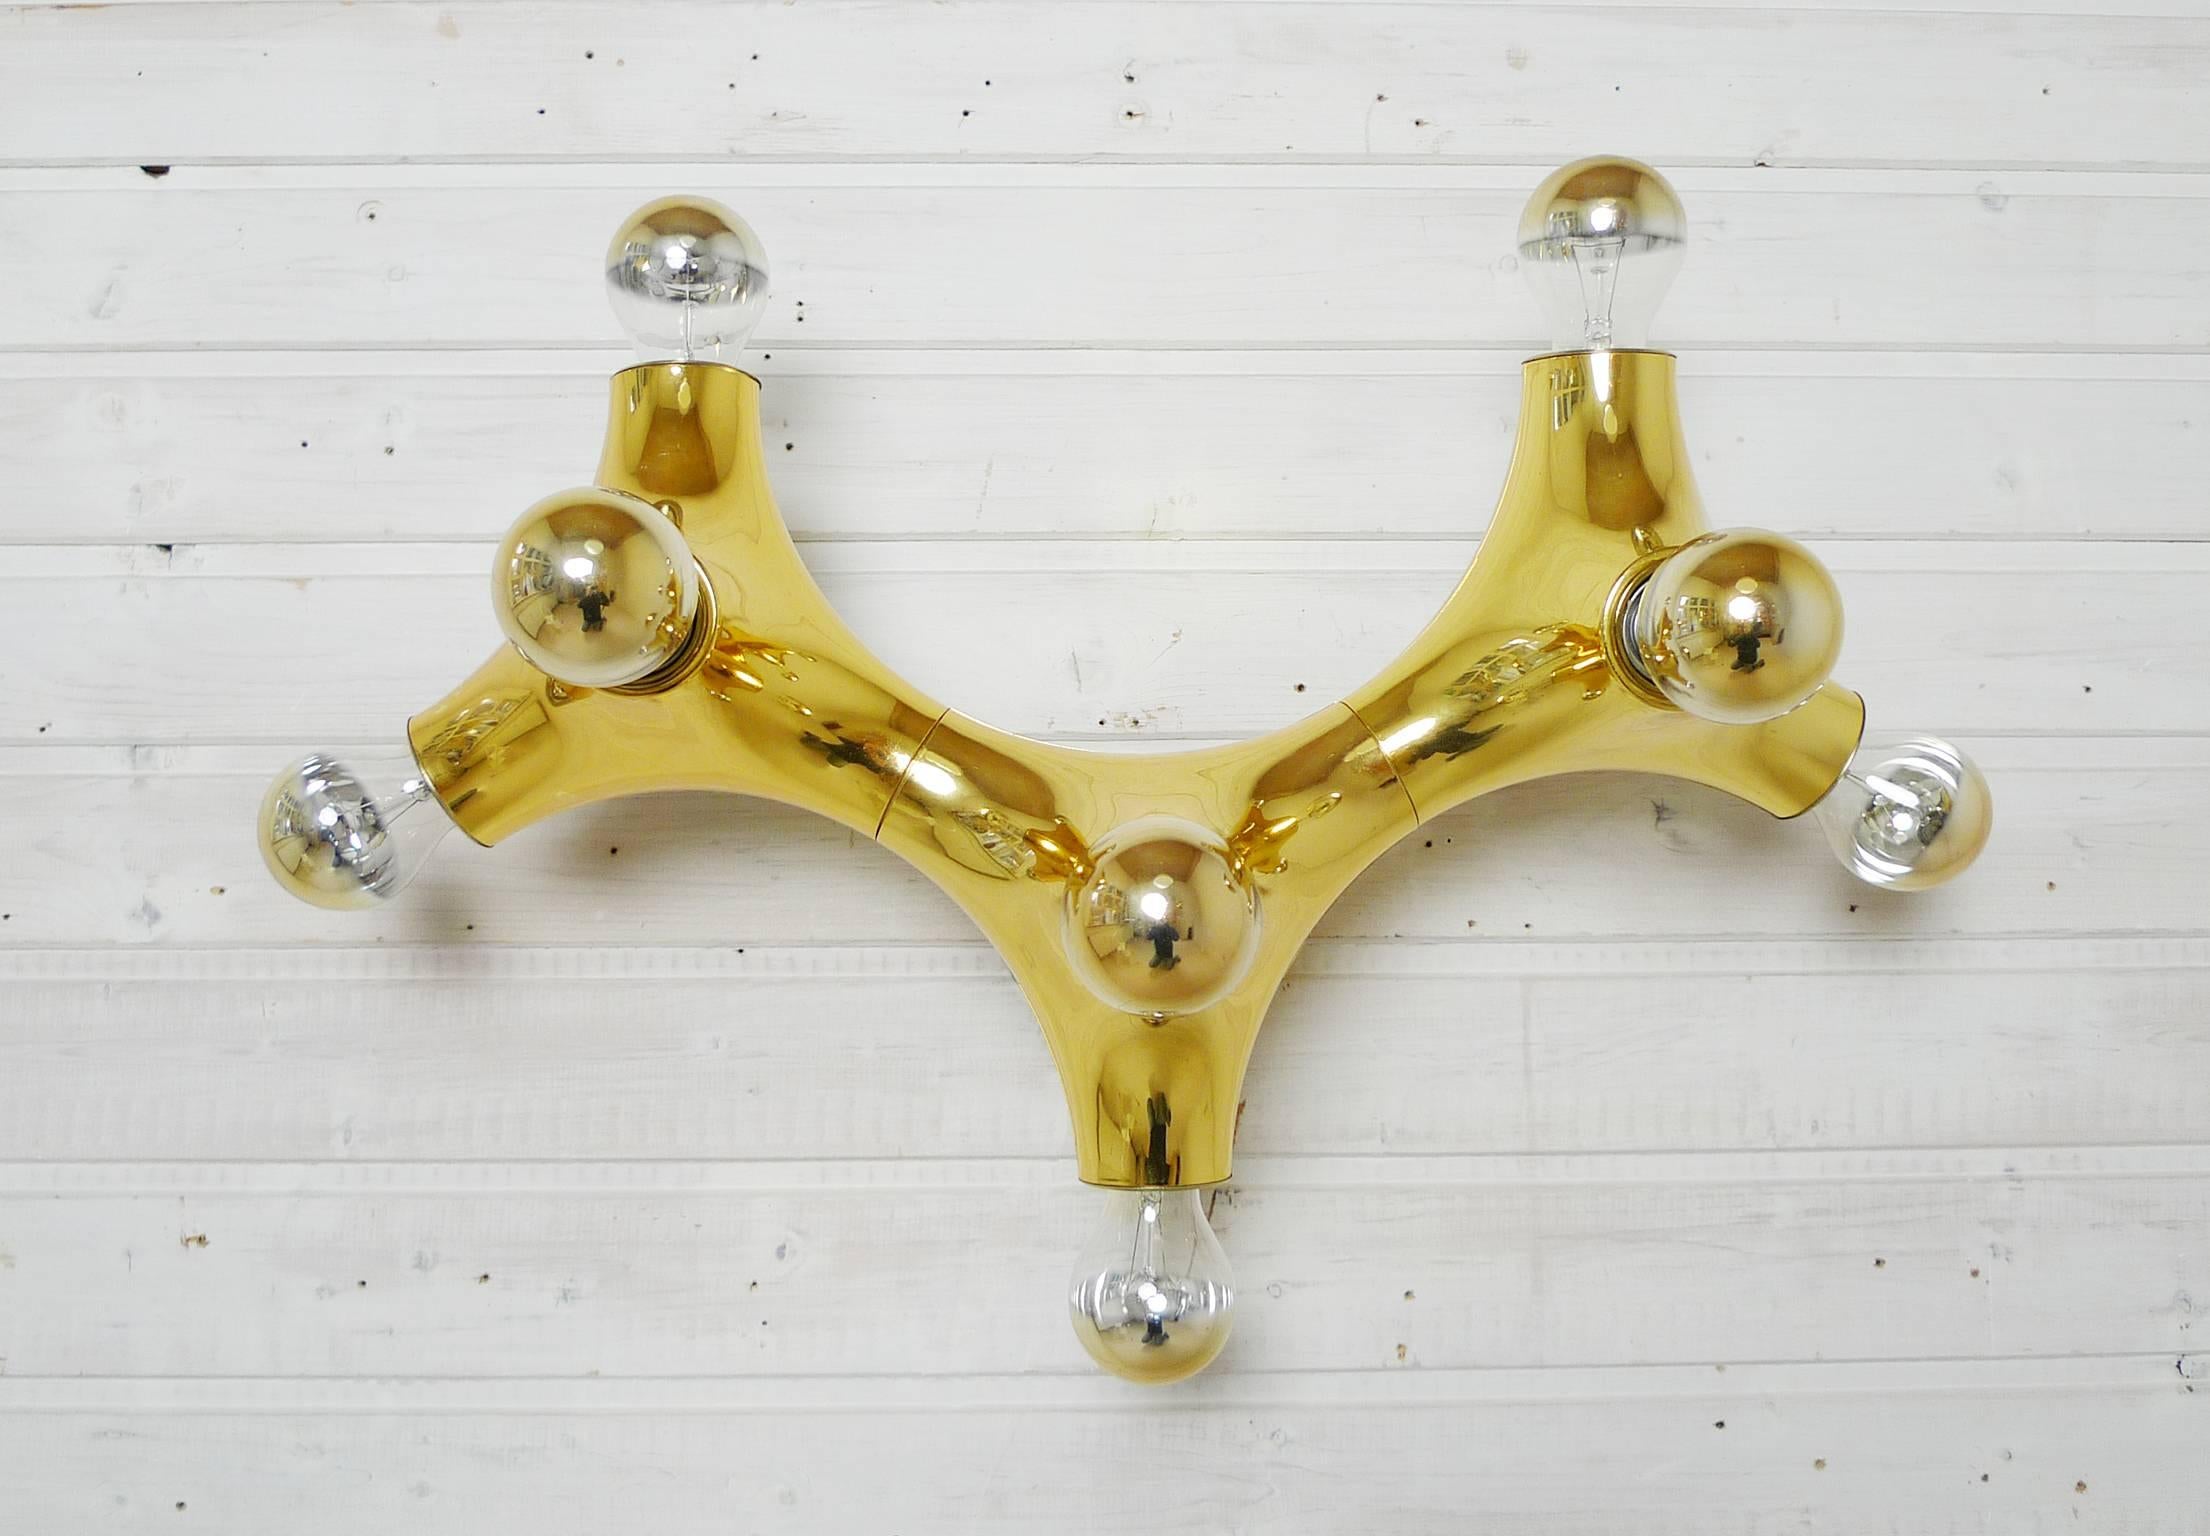 Large golden wall sconce in the shape of a molecule. It has eight bulb holders for E 27 bulbs. This extraordinary lamp was produced by the German lighting company Cosack in the 1970s. The wall sconce is in very good condition.